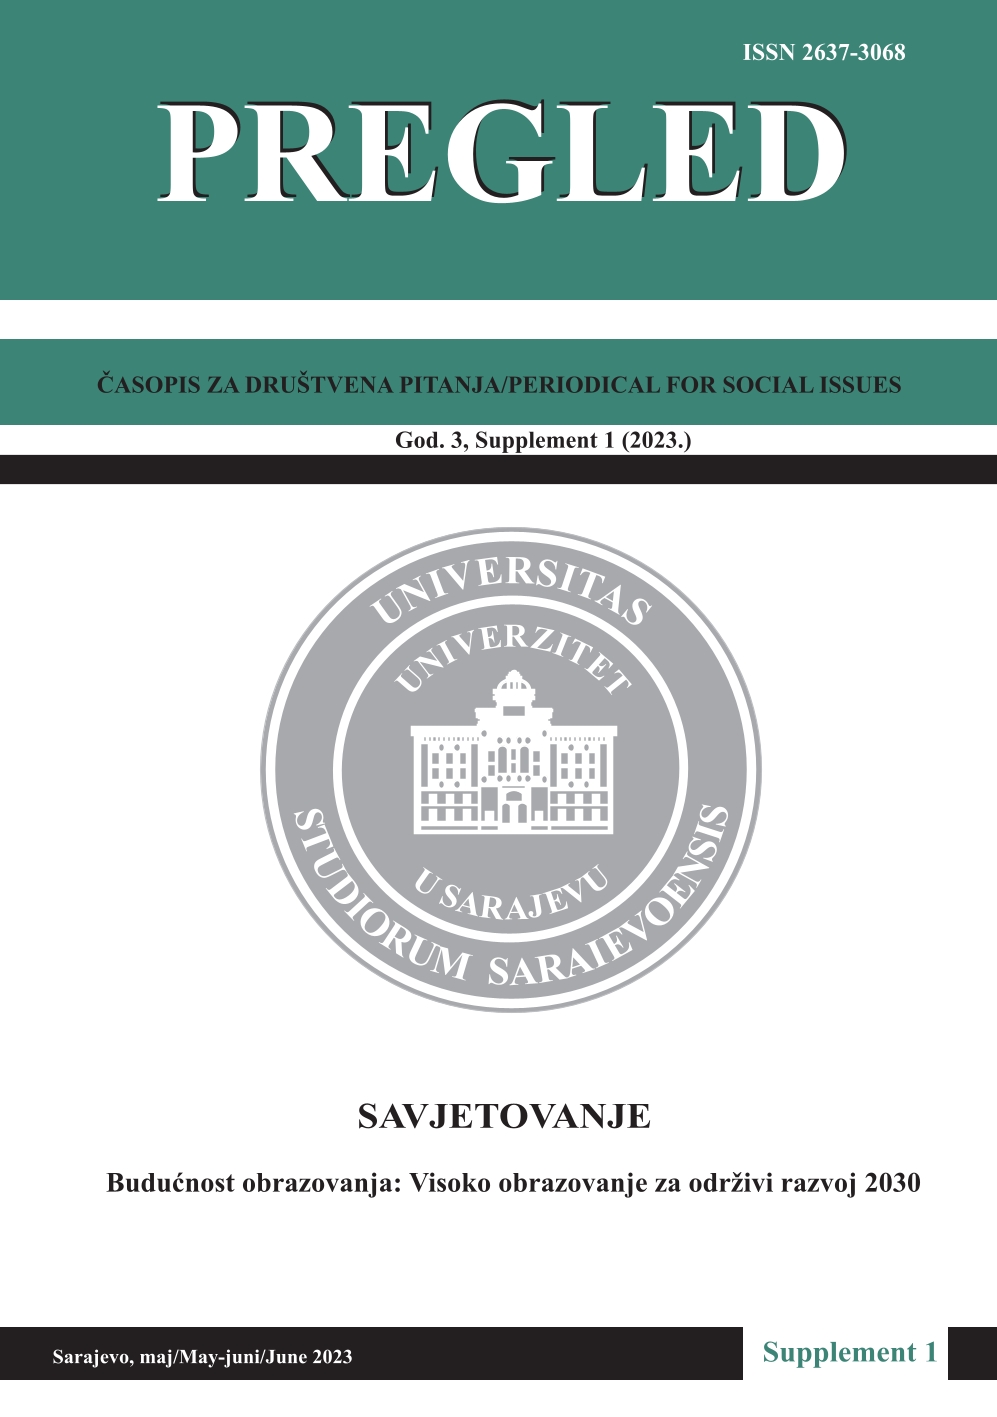 Higher Education in the Period of the Pandemic: International University of Sarajevo Students' Attitudes Towards Online Education and Returning to Face-To-Face Education Cover Image